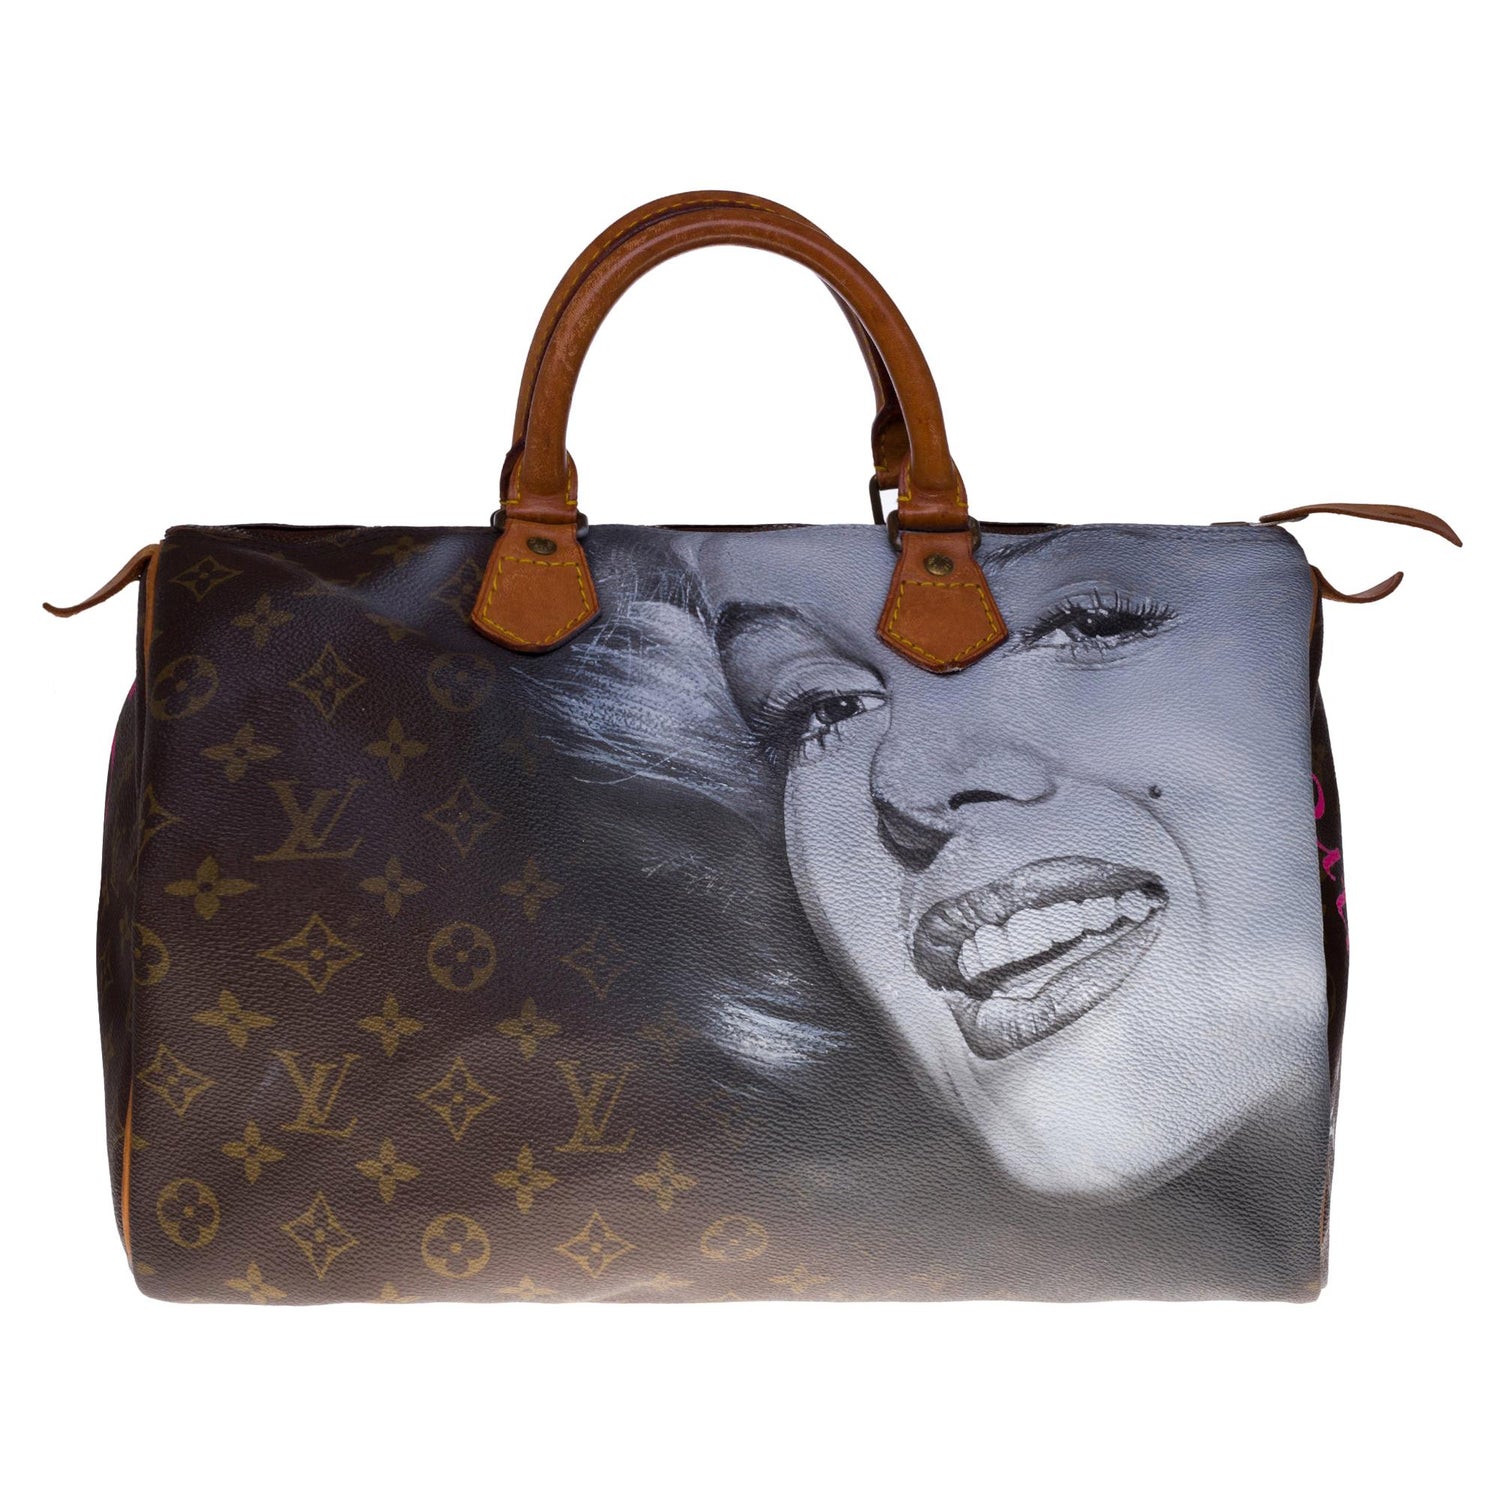 Bagghy Audrey Hepburn Print Leather Handbag With Gold Chain Handle